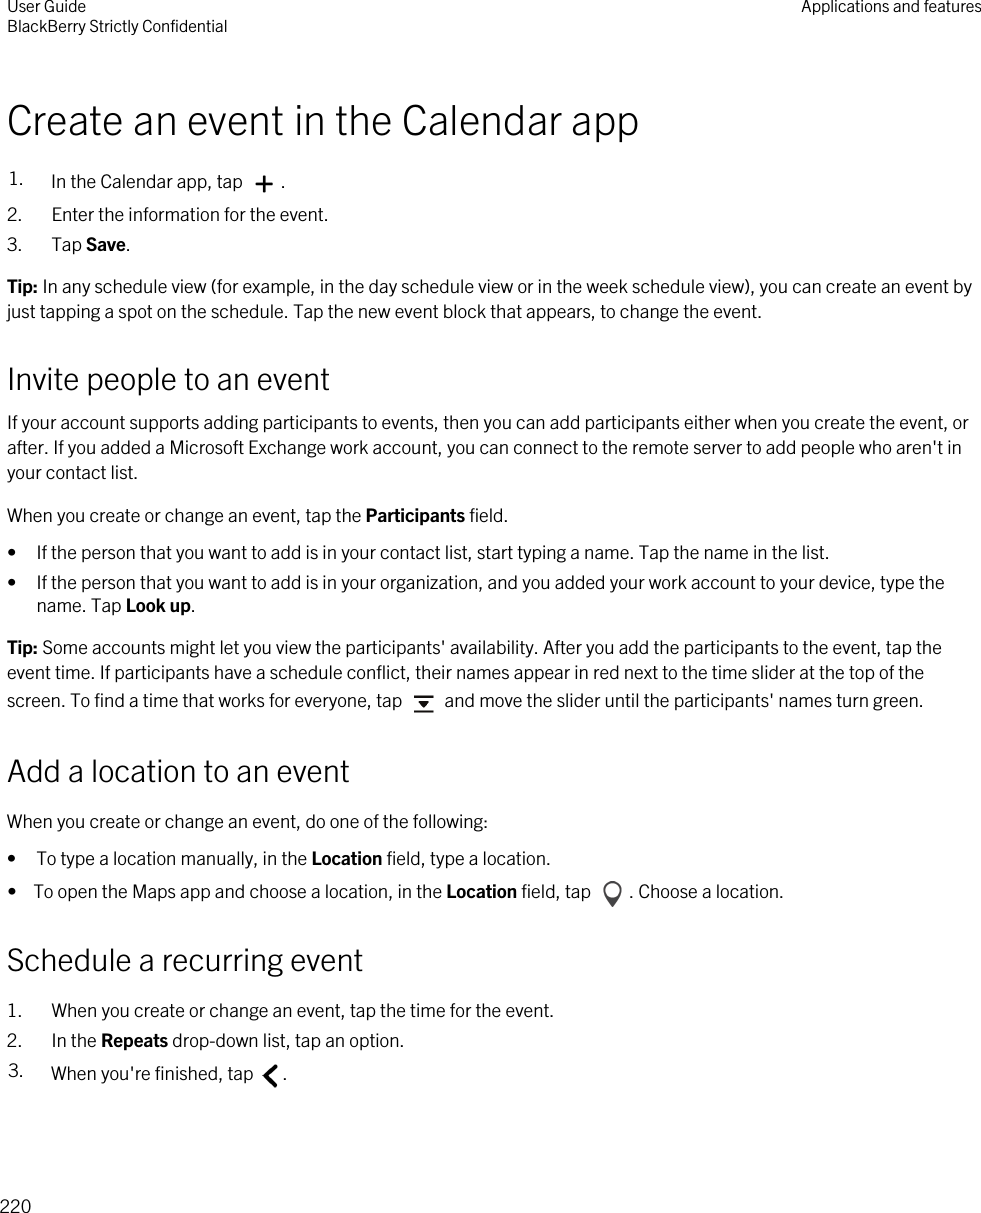 Create an event in the Calendar app1. In the Calendar app, tap  .2. Enter the information for the event.3. Tap Save.Tip: In any schedule view (for example, in the day schedule view or in the week schedule view), you can create an event by just tapping a spot on the schedule. Tap the new event block that appears, to change the event.Invite people to an eventIf your account supports adding participants to events, then you can add participants either when you create the event, or after. If you added a Microsoft Exchange work account, you can connect to the remote server to add people who aren&apos;t in your contact list.When you create or change an event, tap the Participants field.• If the person that you want to add is in your contact list, start typing a name. Tap the name in the list.• If the person that you want to add is in your organization, and you added your work account to your device, type the name. Tap Look up.Tip: Some accounts might let you view the participants&apos; availability. After you add the participants to the event, tap the event time. If participants have a schedule conflict, their names appear in red next to the time slider at the top of the screen. To find a time that works for everyone, tap   and move the slider until the participants&apos; names turn green.Add a location to an eventWhen you create or change an event, do one of the following:• To type a location manually, in the Location field, type a location.•  To open the Maps app and choose a location, in the Location field, tap  . Choose a location.Schedule a recurring event1. When you create or change an event, tap the time for the event.2. In the Repeats drop-down list, tap an option.3. When you&apos;re finished, tap  .User GuideBlackBerry Strictly Confidential Applications and features220